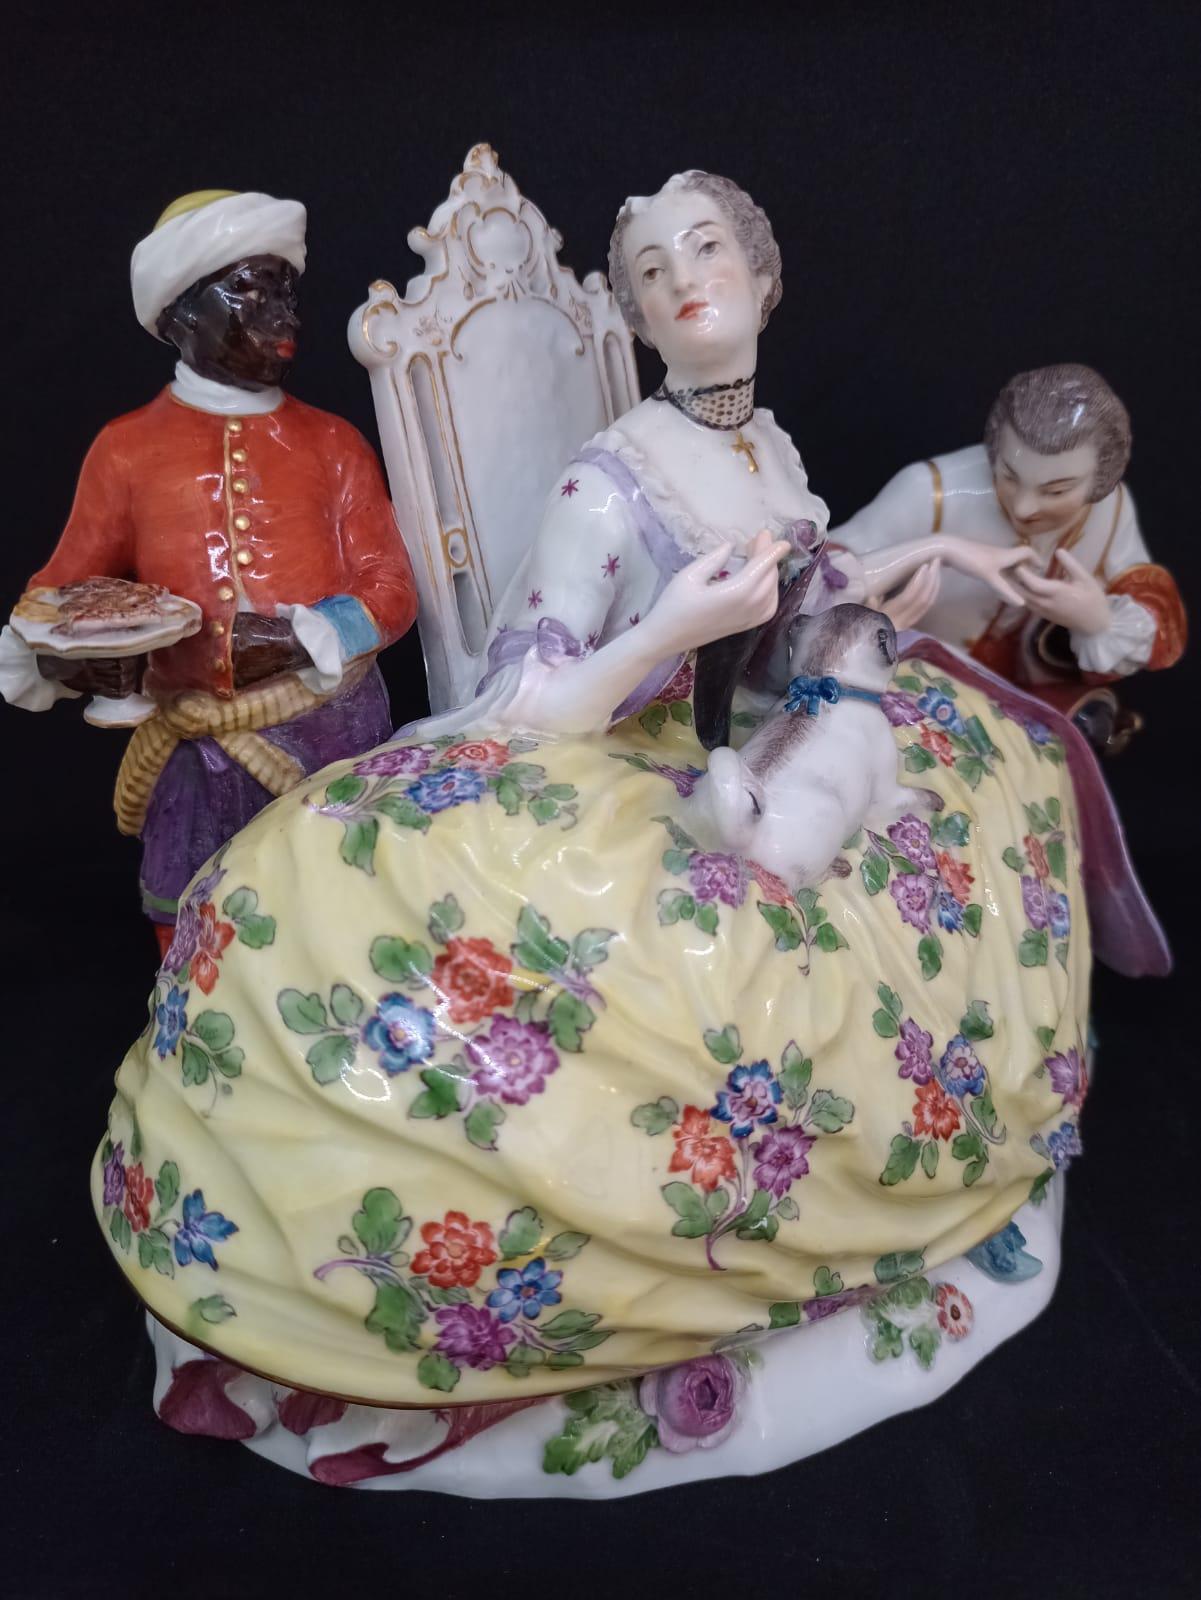 Meissen Porcelain Germany JJ Kaendler
Origin Germany Circa 1850
Design by J.J. Kaendler
Porcelain material. hand made and painted
rococo style
Very good conditions. Natural wear due to the passage of time.

Meissen porcelain (in German